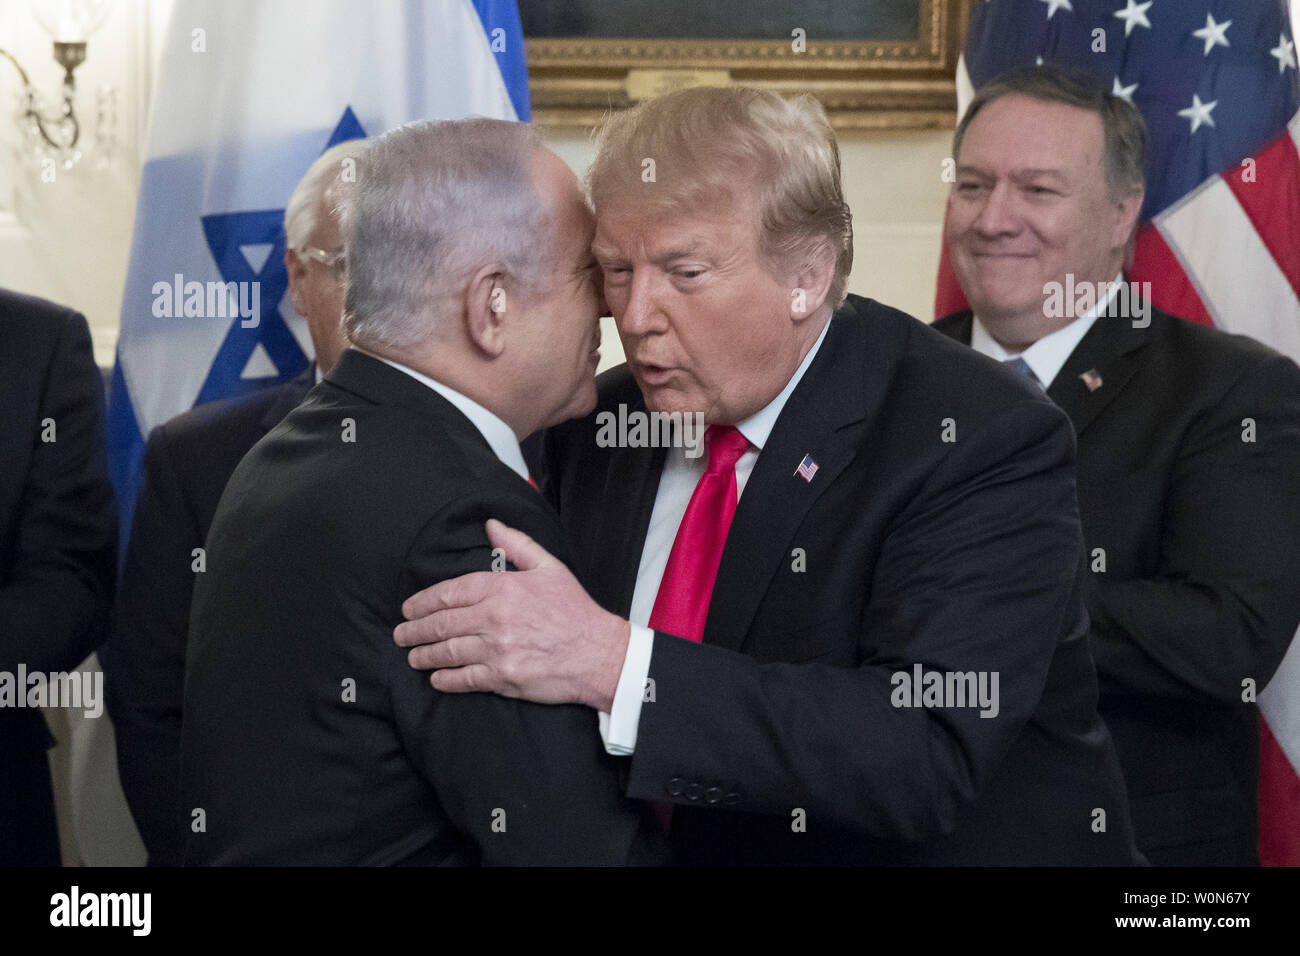 President Donald Trump is hugged by Israeli Prime Minister Benjamin Netayahu  after Trump signed an order recognizing the Golan Heights as Israeli territory  in the Diplomatic Reception Room of the White House in Washington, DC on March 25, 2019.     Photo by Michael Reynolds/UPI Stock Photo